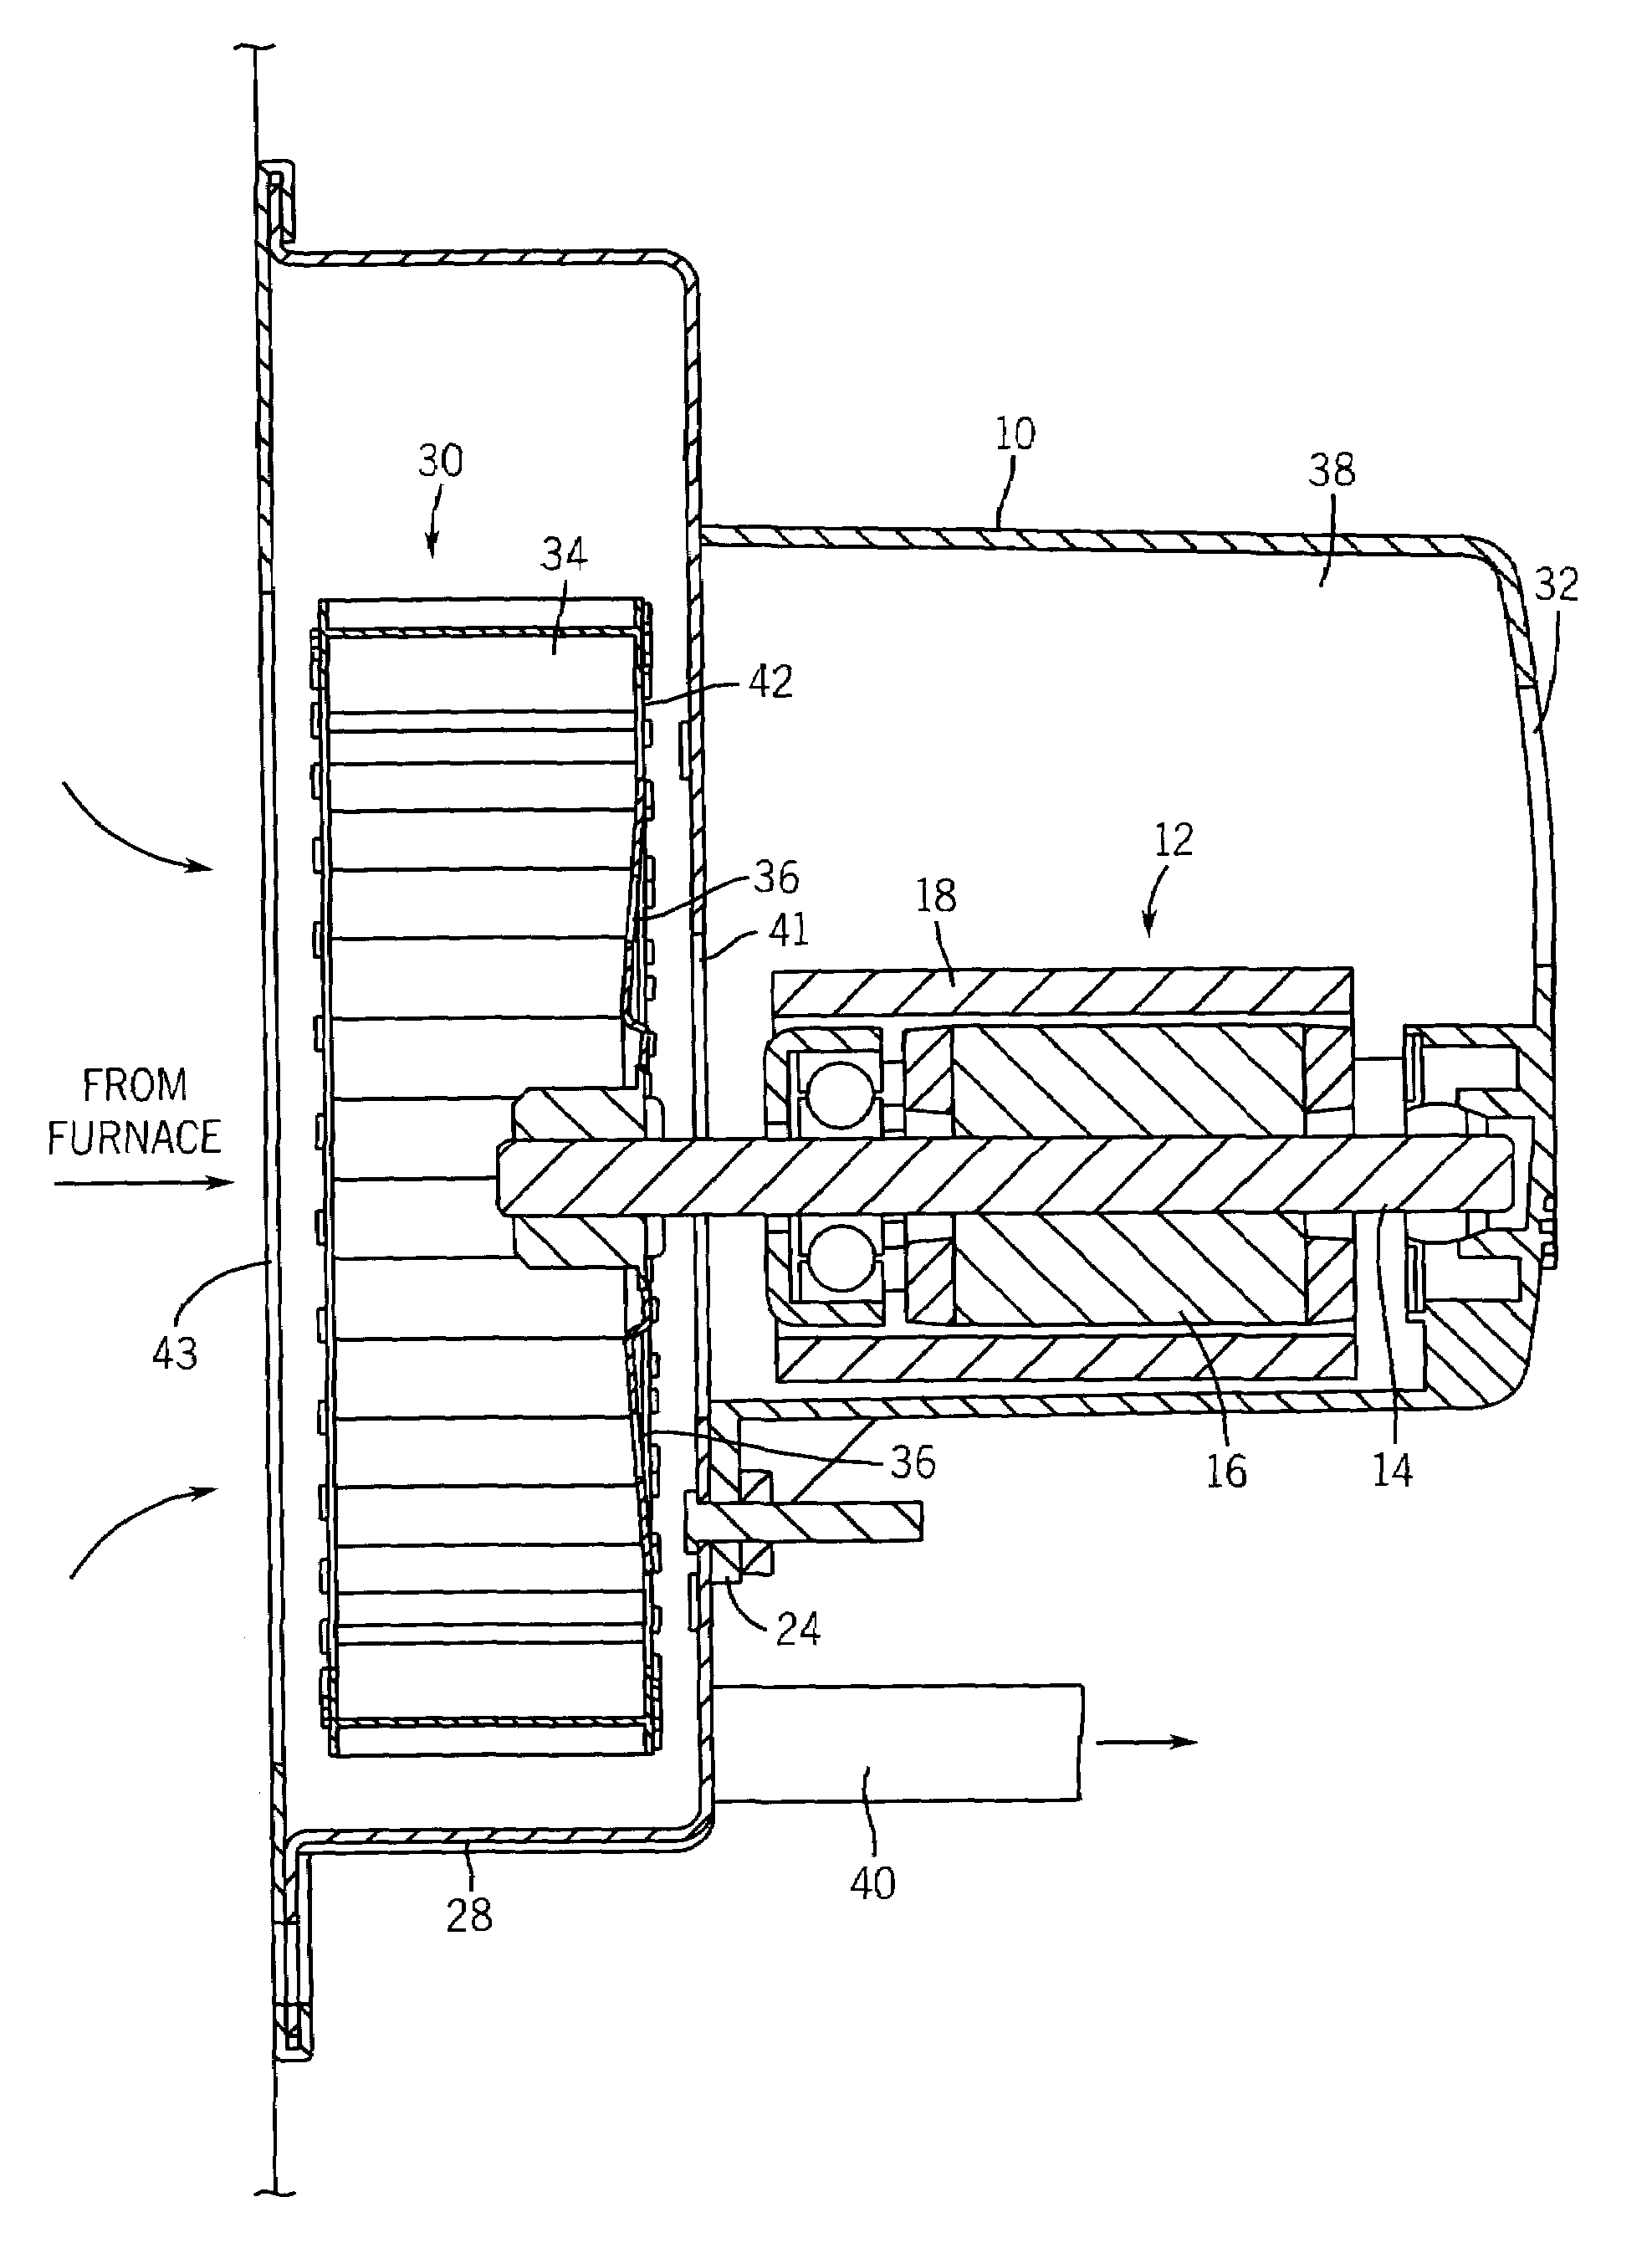 Method for cooling a motor in a blower assembly for a furnance